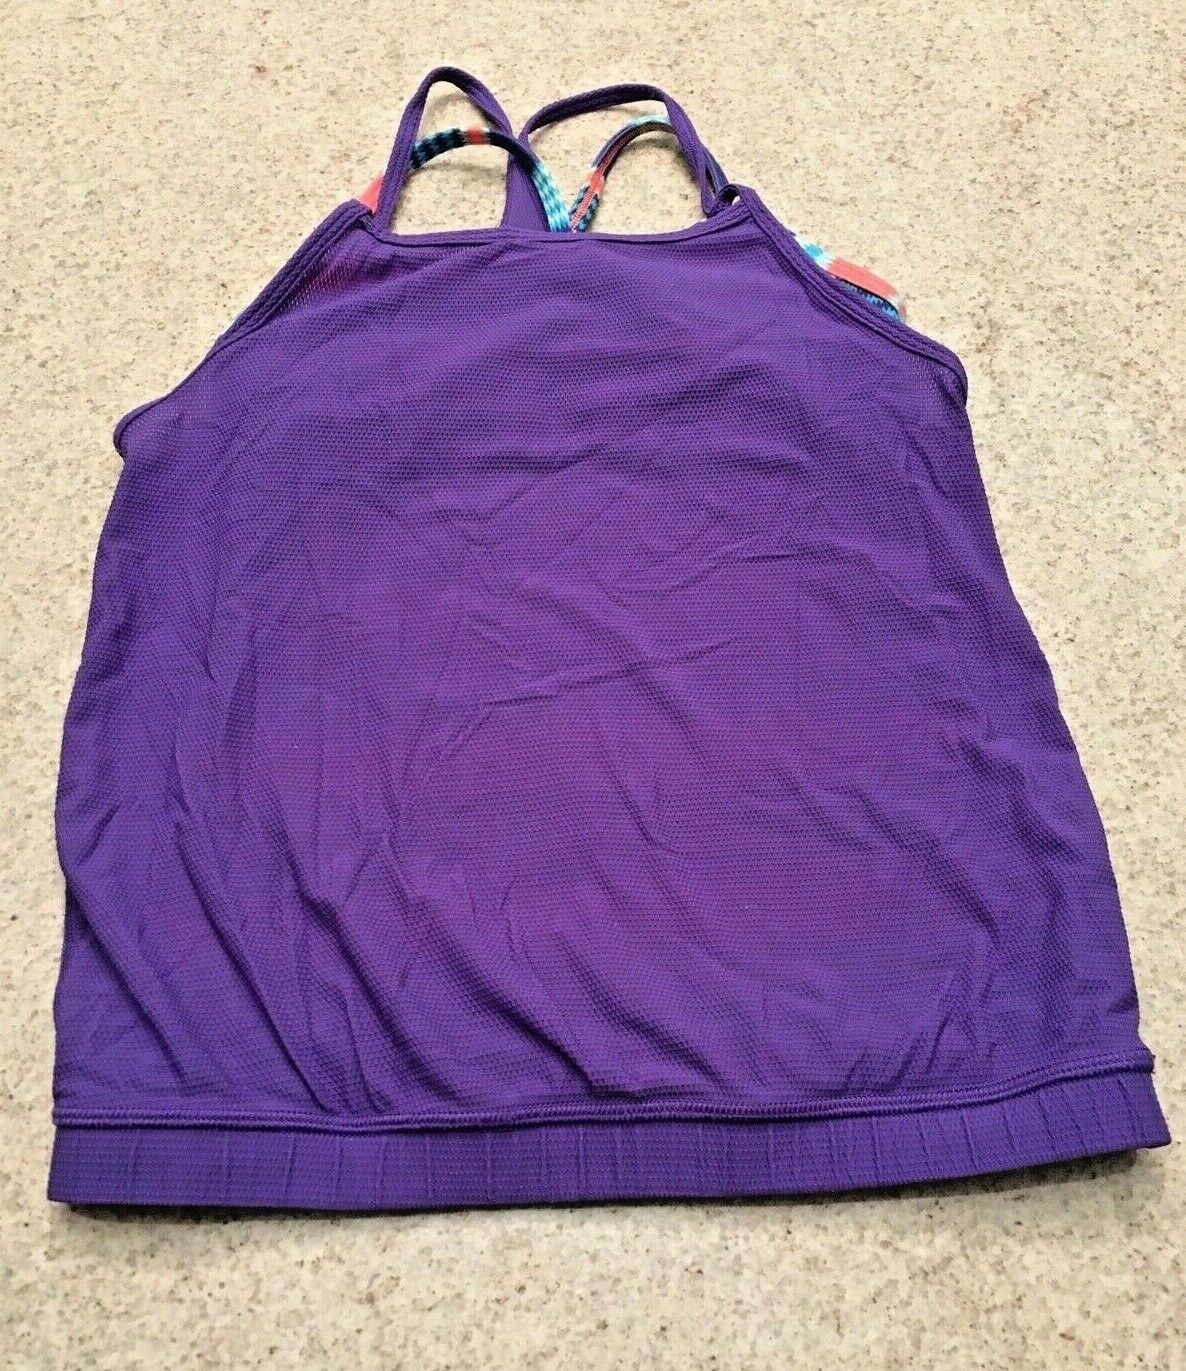 Primary image for Girl's Ivivva by Lululemon Purple Double Layer Strappy Tank Top (7)